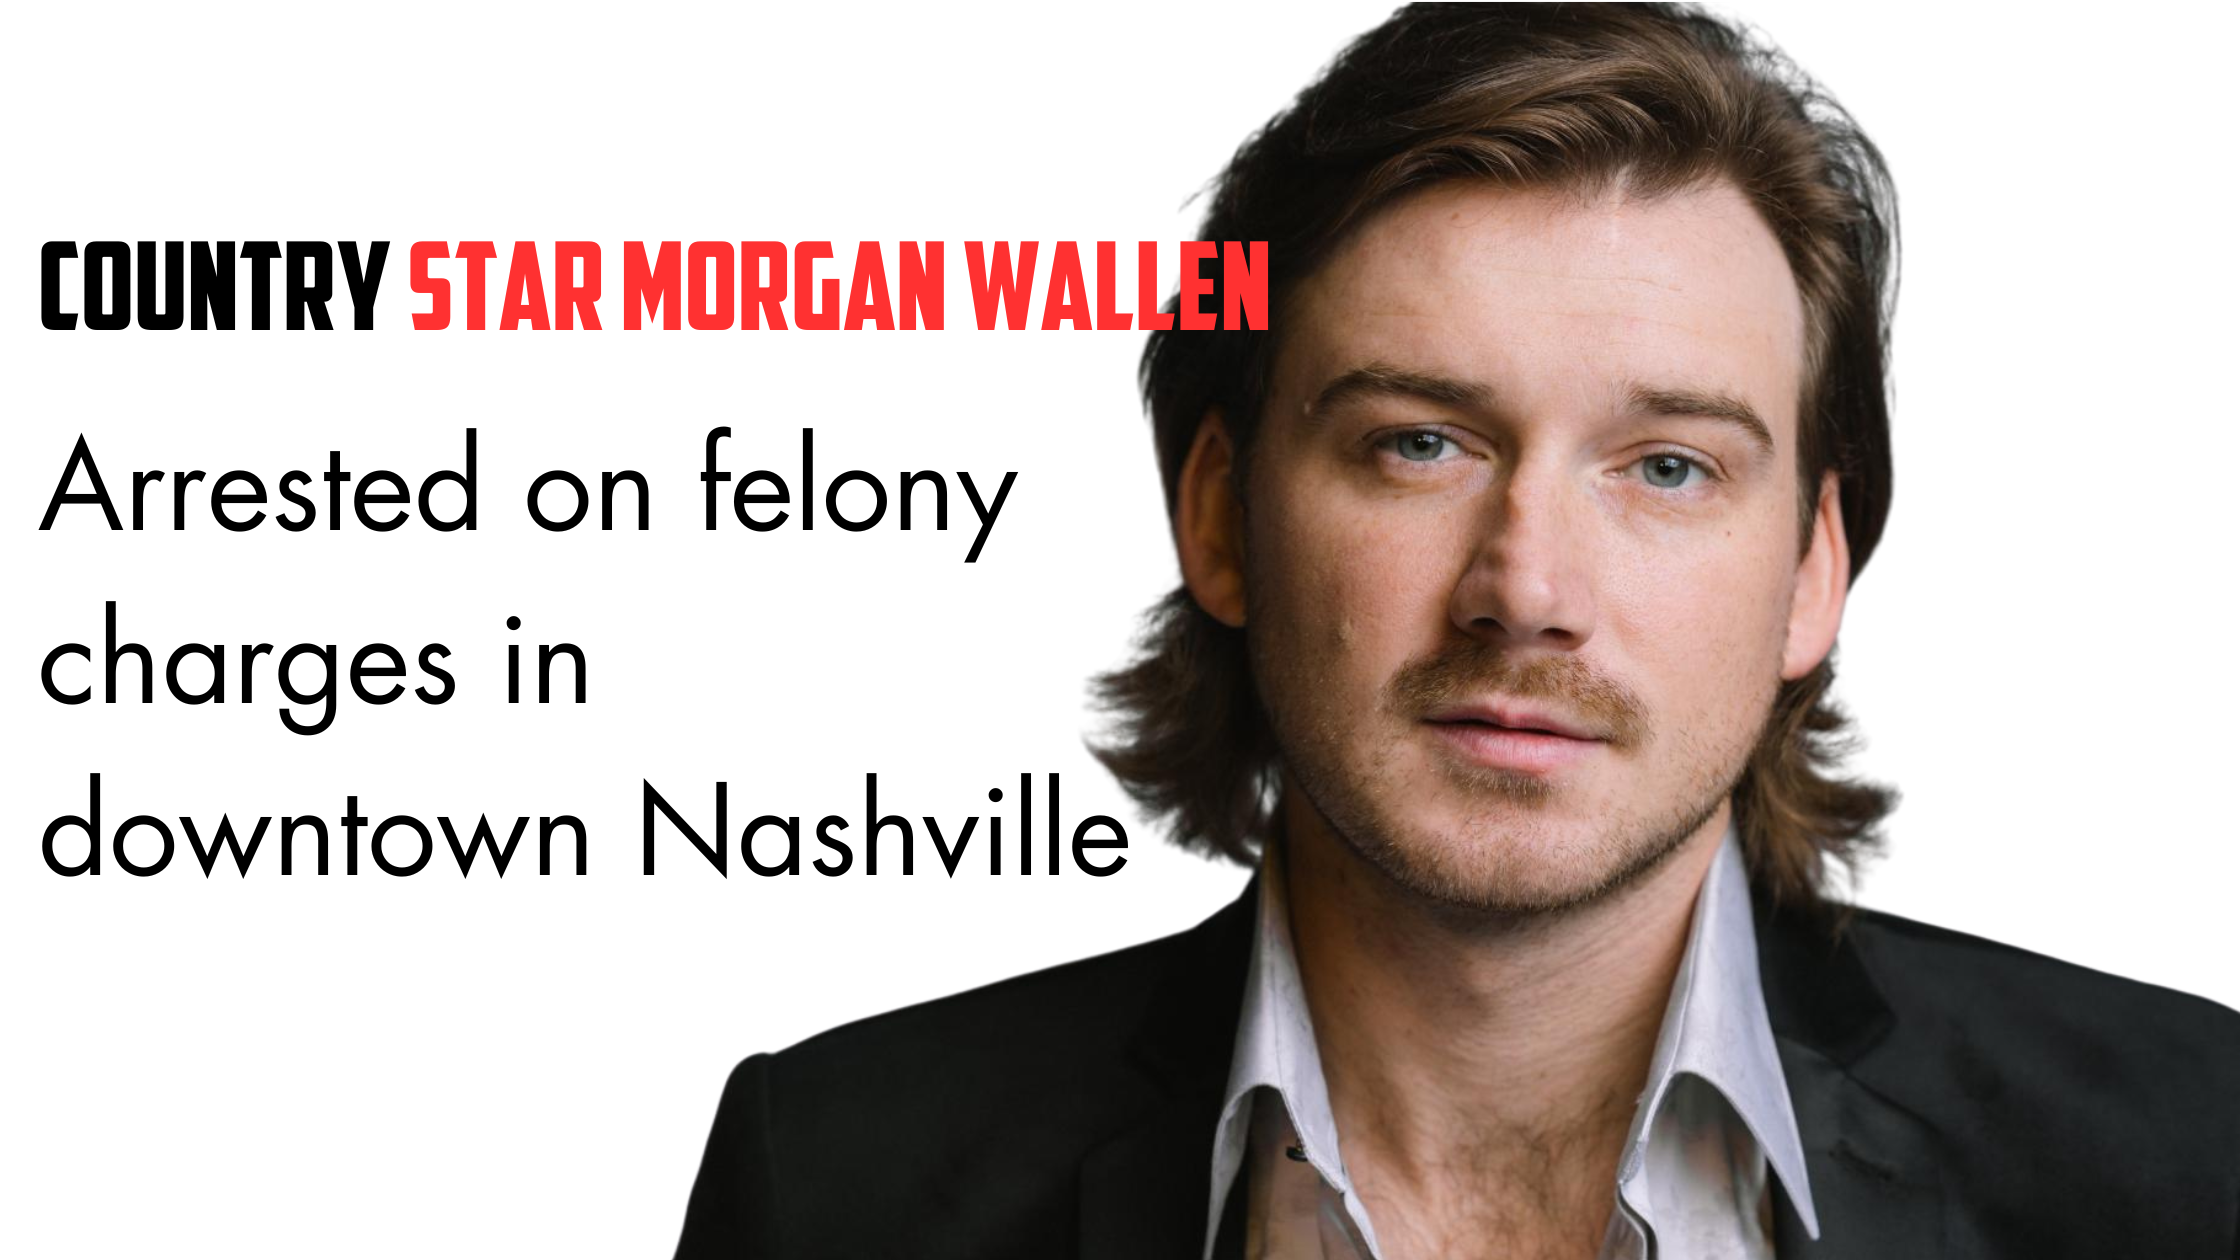 Country star Morgan Wallen arrested on felony charges in downtown Nashville 